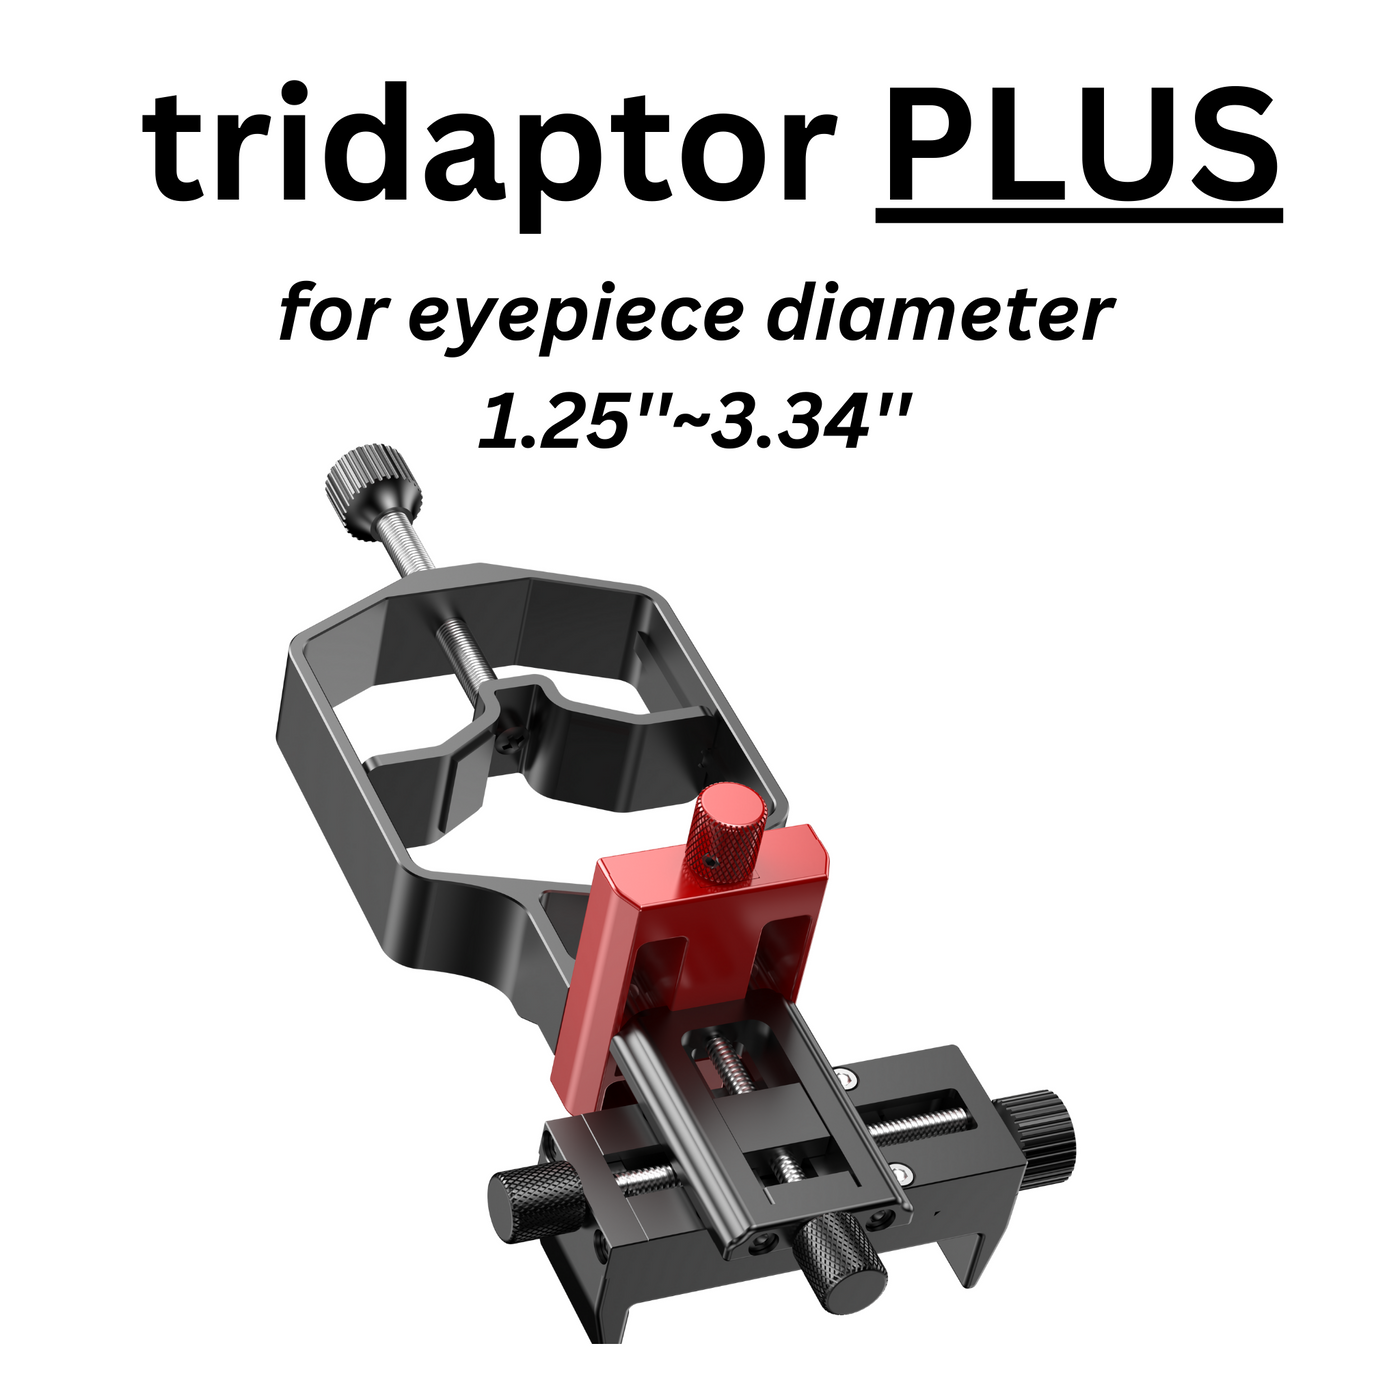 tridaptor - The best telescope phone adapter ever- TRIDAPTOR for 3-axis adjustment!